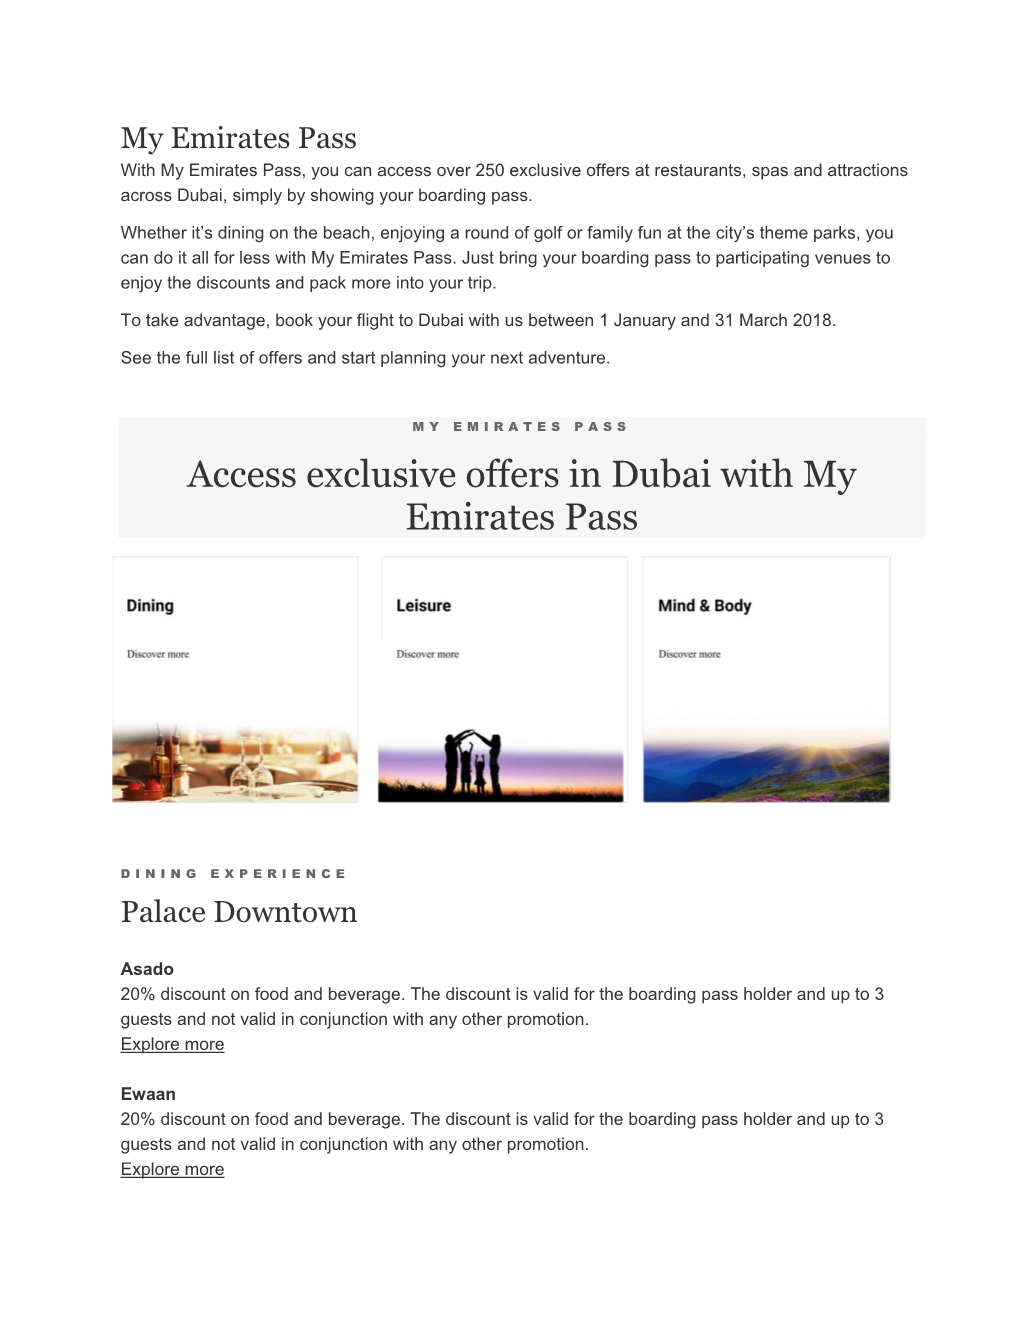 Access Exclusive Offers in Dubai with My Emirates Pass